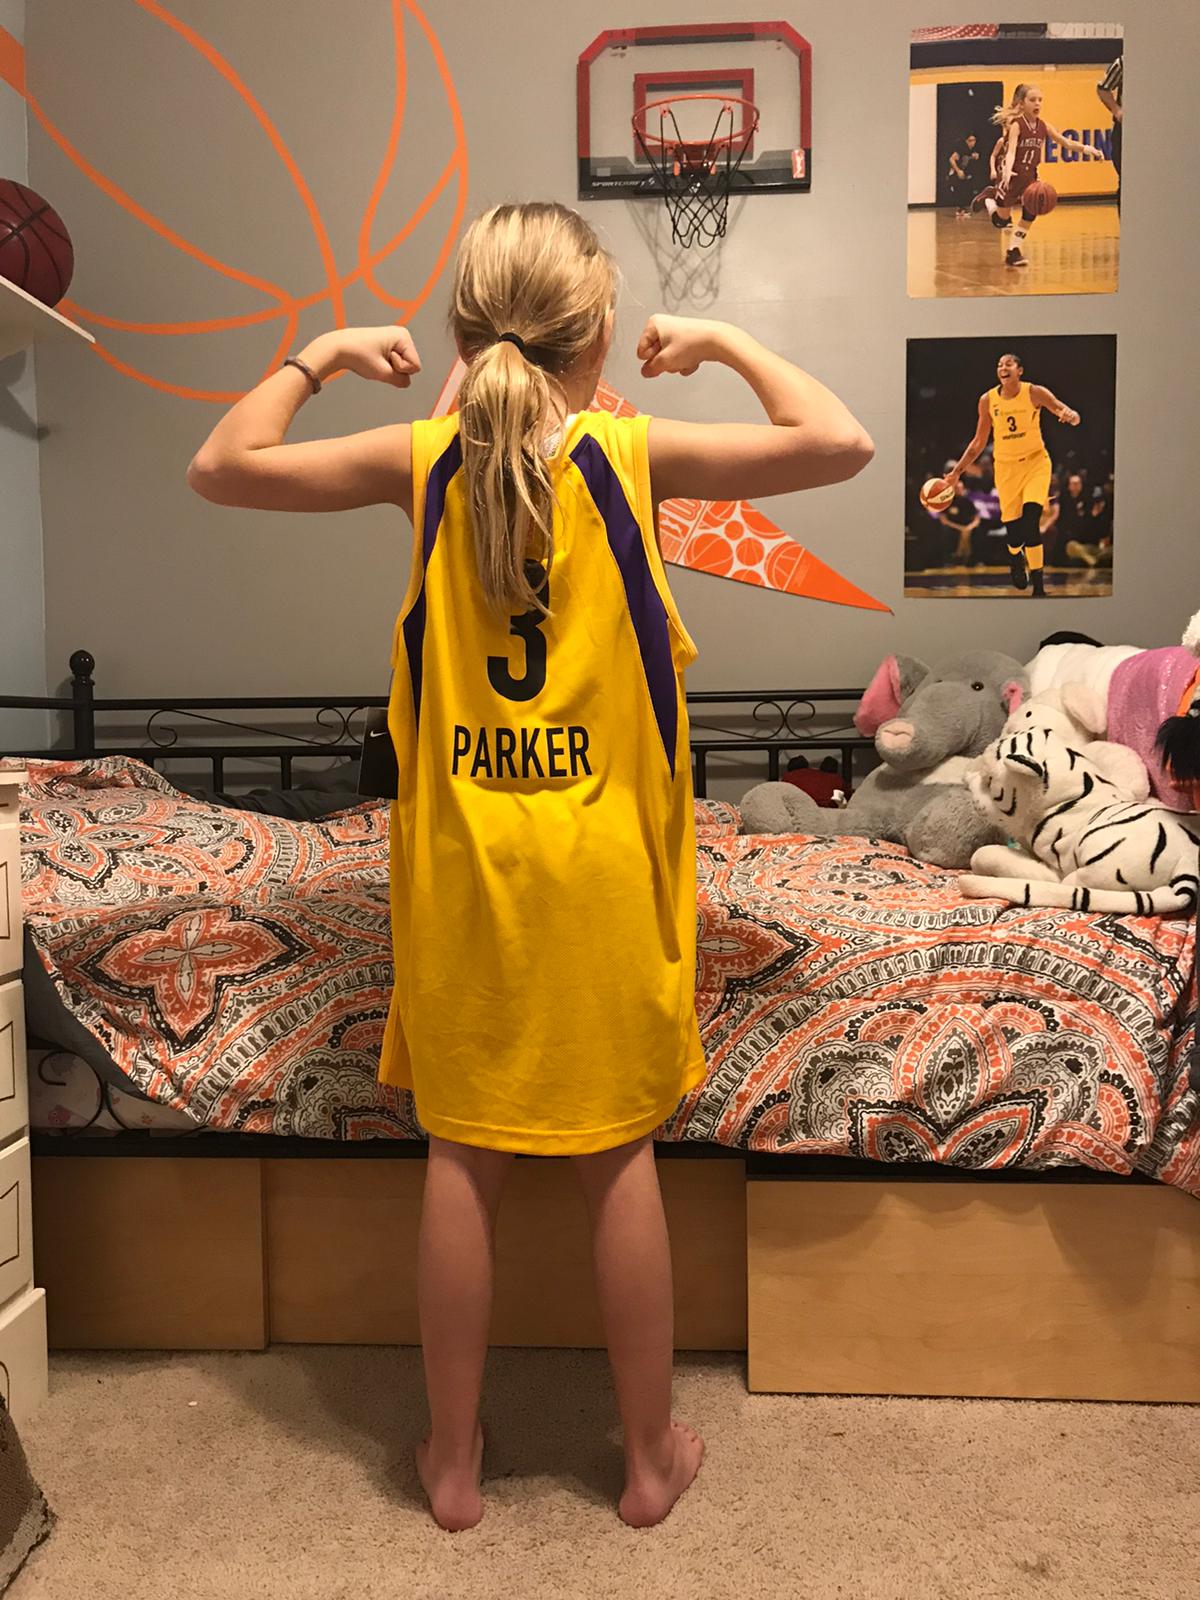 One Size Fits All? A trip to New York left 10-year-old Kalia dismayed but inspired to fight even harder for gender equality in sport.